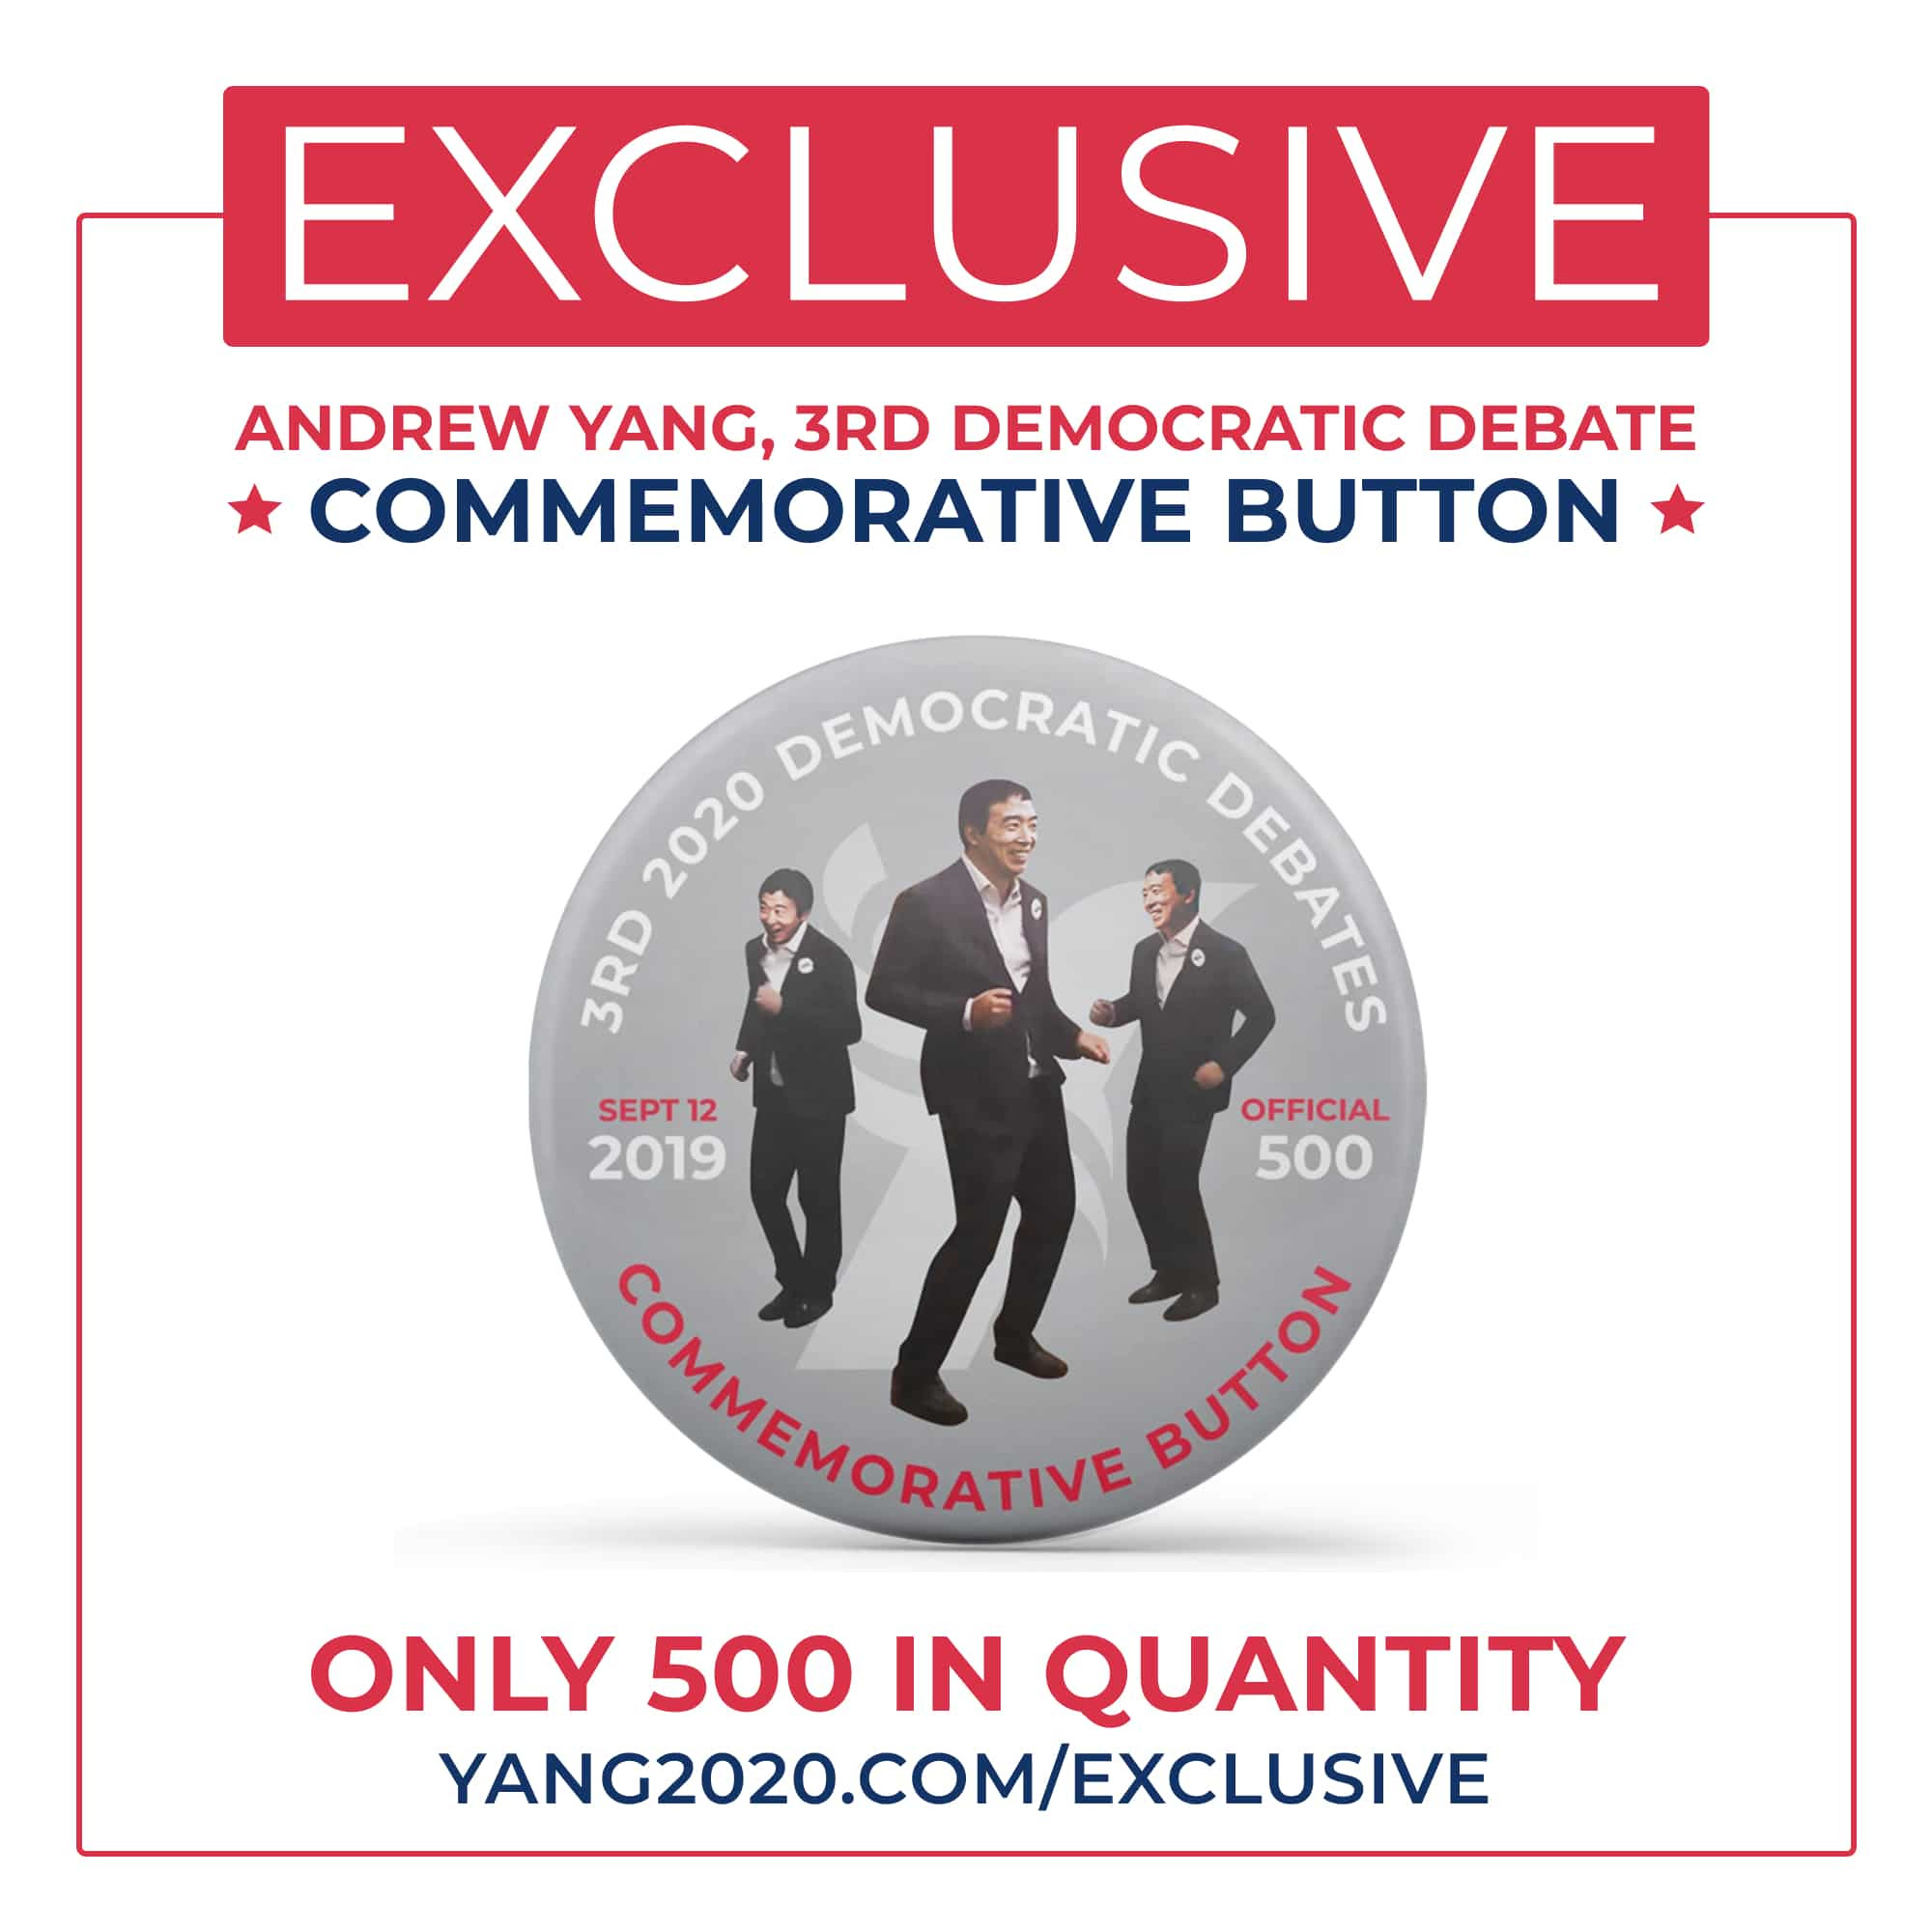 EXCLUSIVE Andrew Yang 3rd Democratic Debate Commemorative Button. Gray button with three dancing images of Andrew and text that reads “3rd 2020 Democratic Debates Commemorative Button Sept 12 2019 Official 500” Only 500 in quantity yang2020.com/exclusive